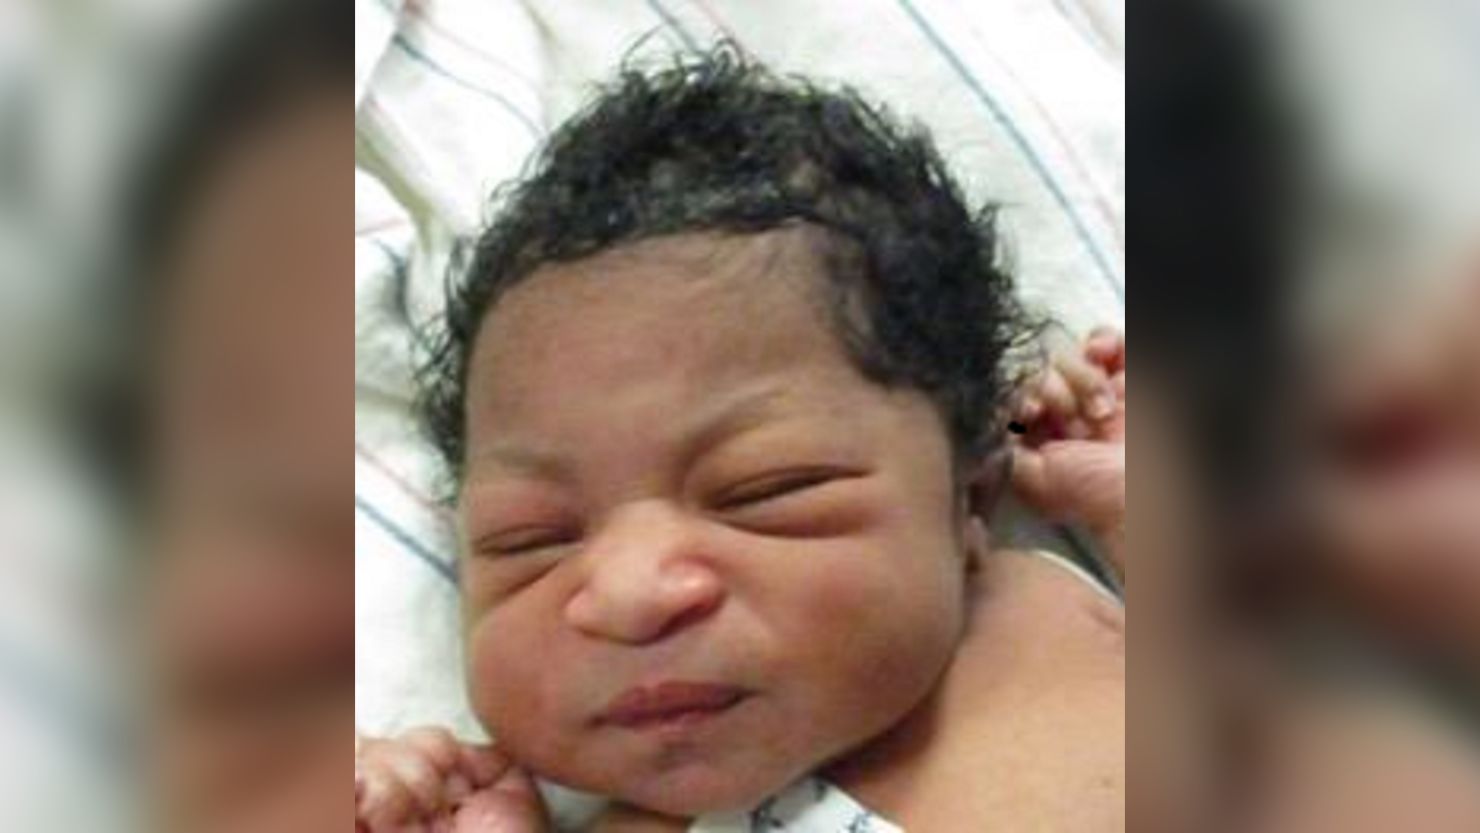 A swaddled baby with her umbilical cord attached was found on a porch in Pennsylvania--- and police are looking for her parents. 